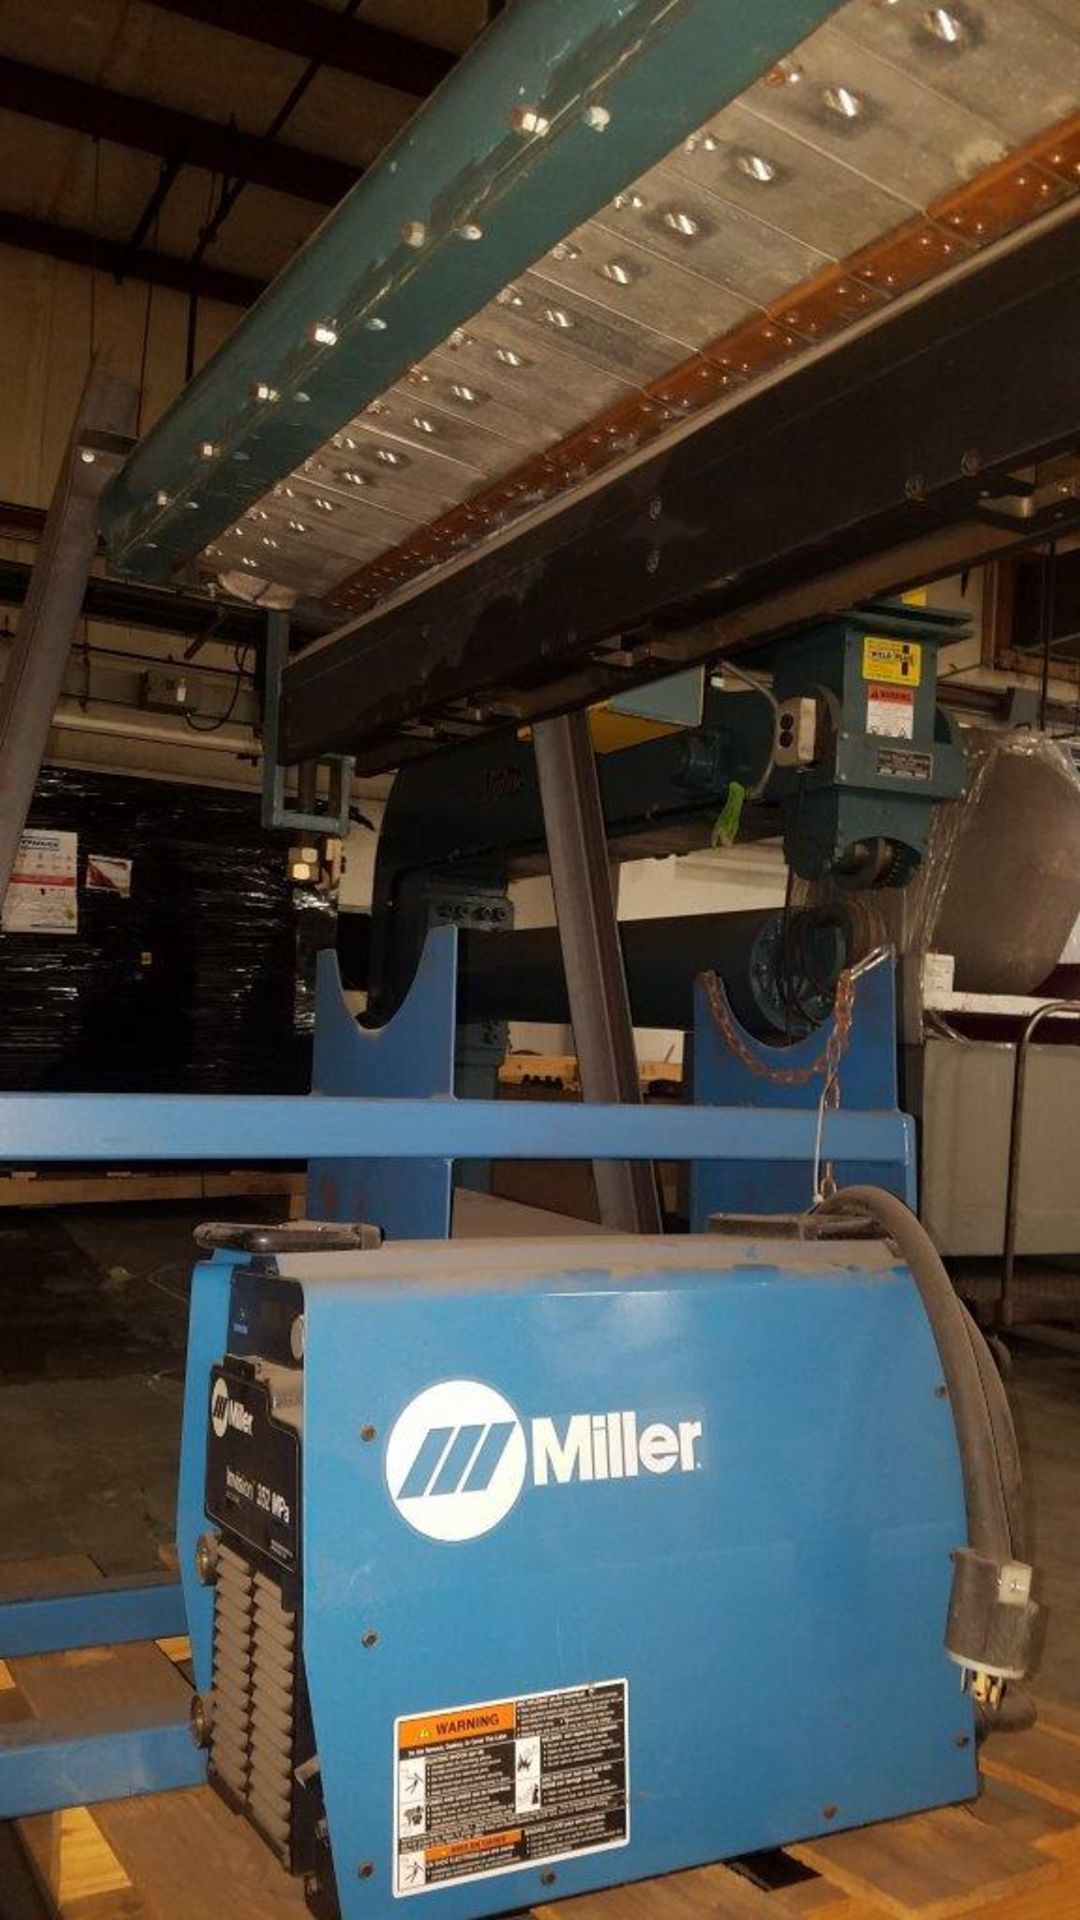 Jetline Seam Welder w/ Miller Invision 352, Mdl: LW-84, S/N: N/A, 76" Max Clamp/Travel Distance, - Image 10 of 15